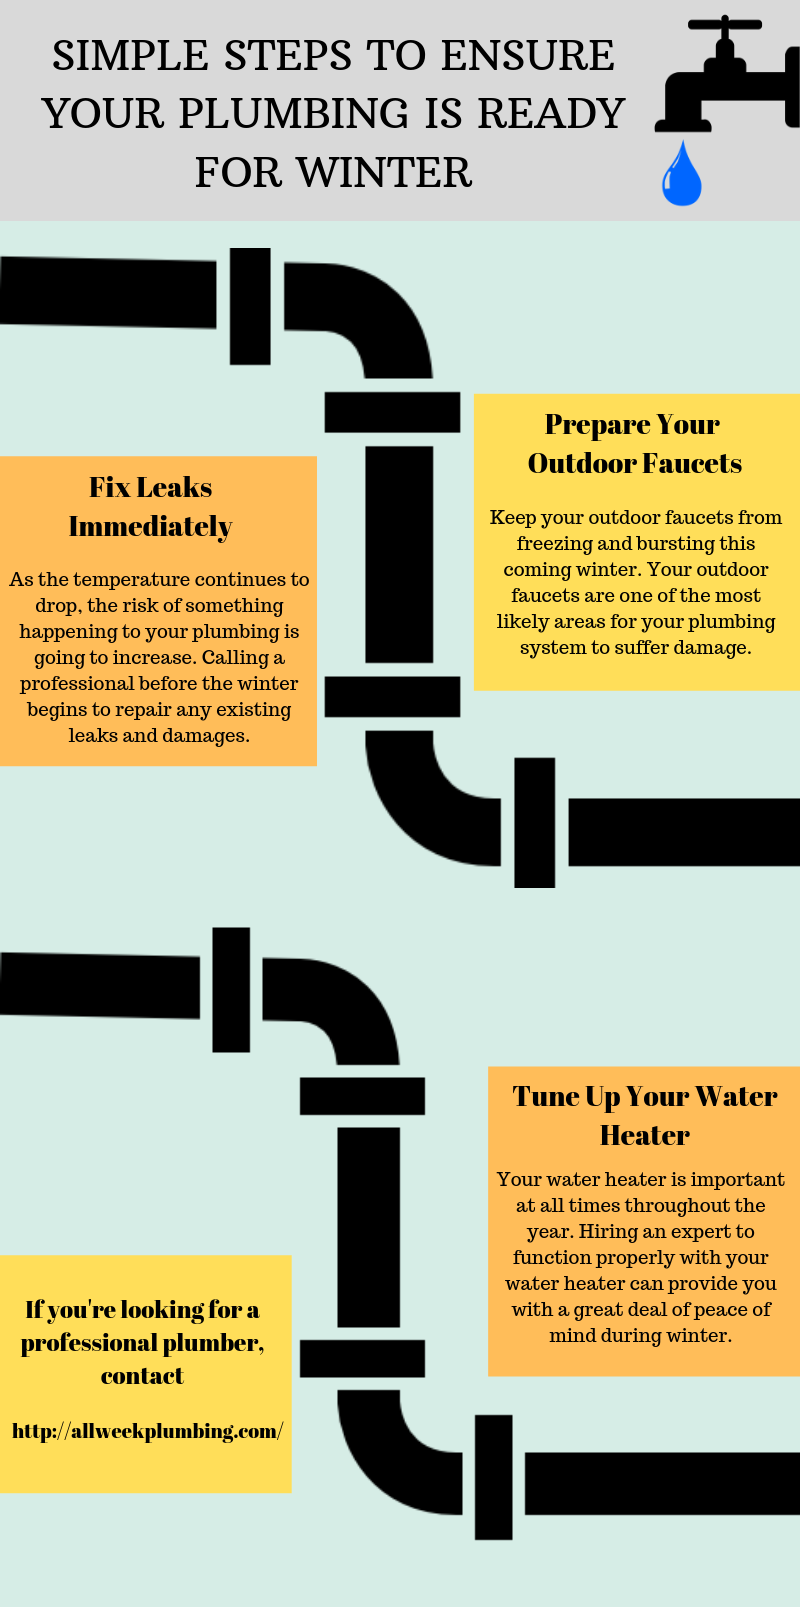 SIMPLE STEPS TO ENSURE YOUR PLUMBING IS READY FOR WINTER